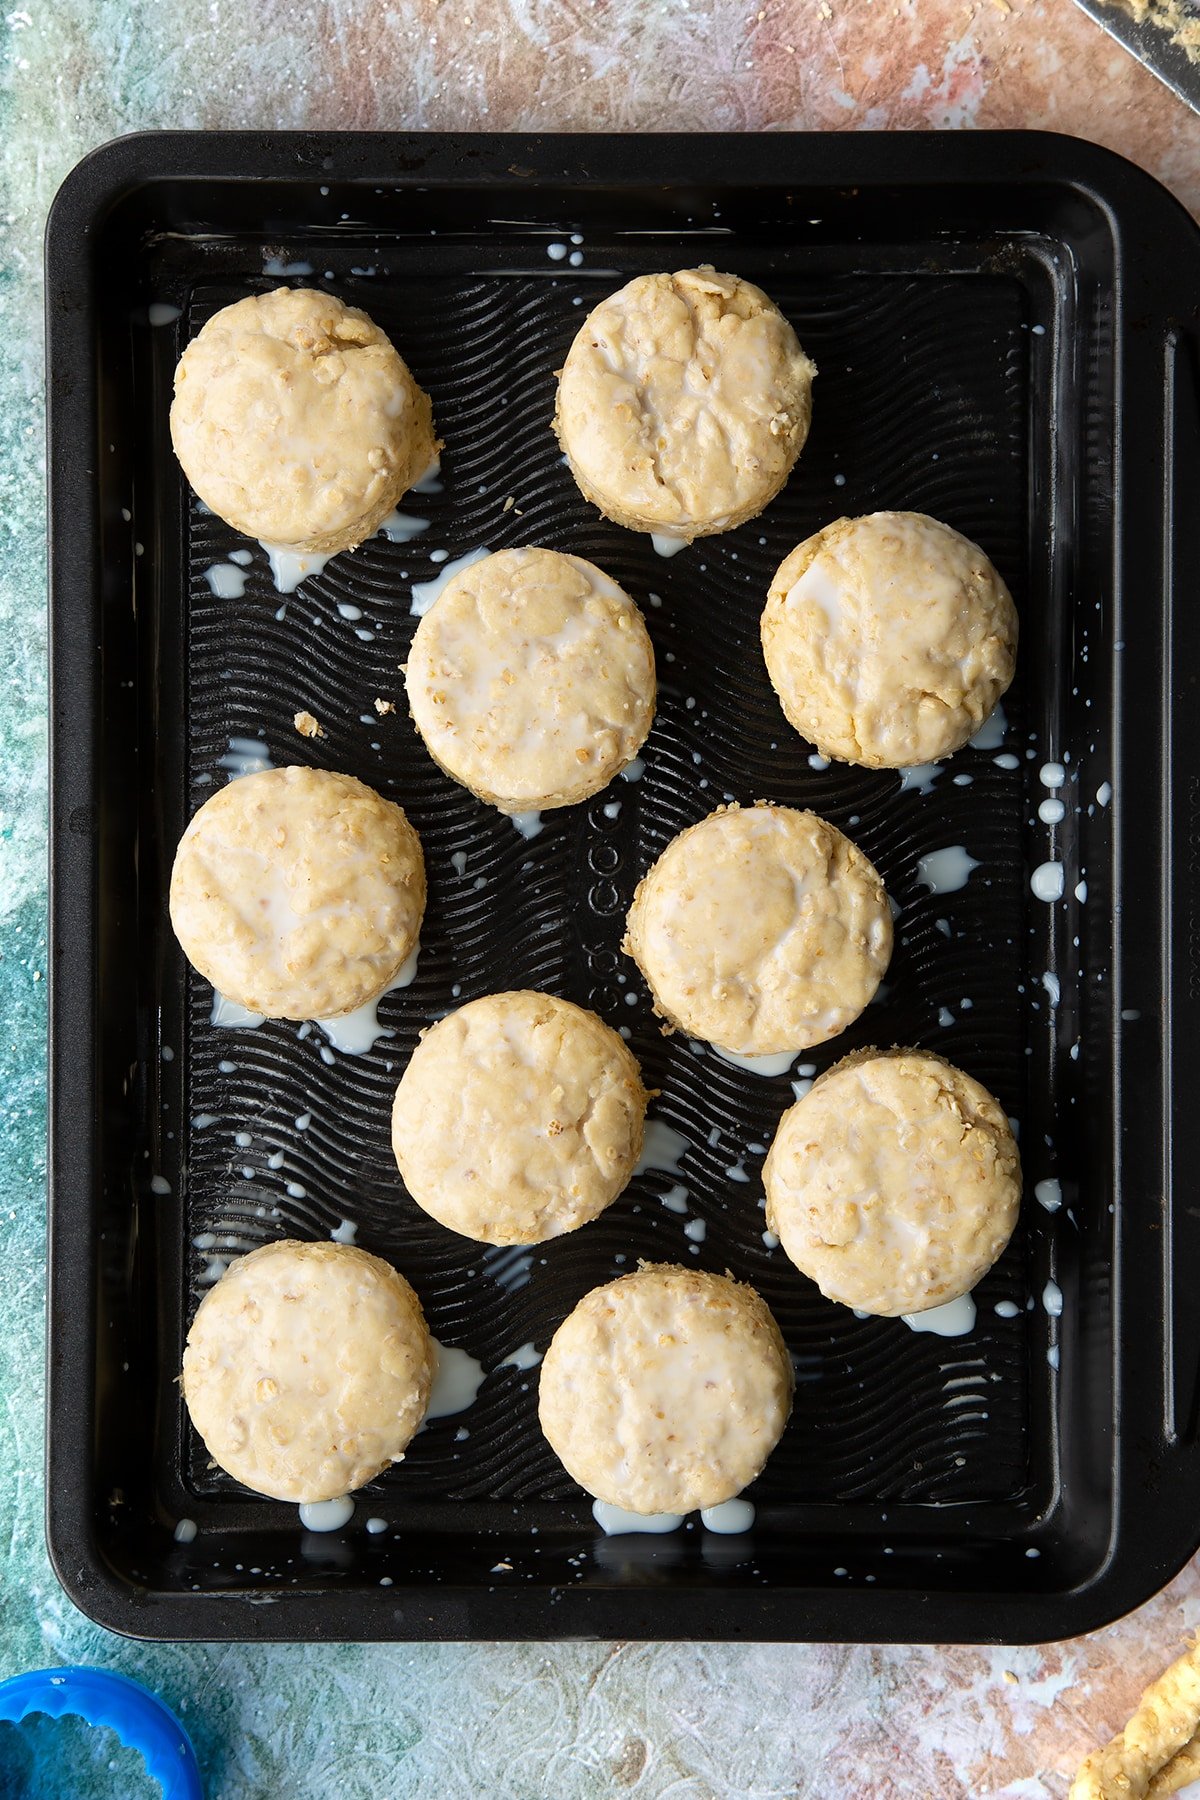 Oatmeal scone rounds of dough brushed with milk on a baking tray. 